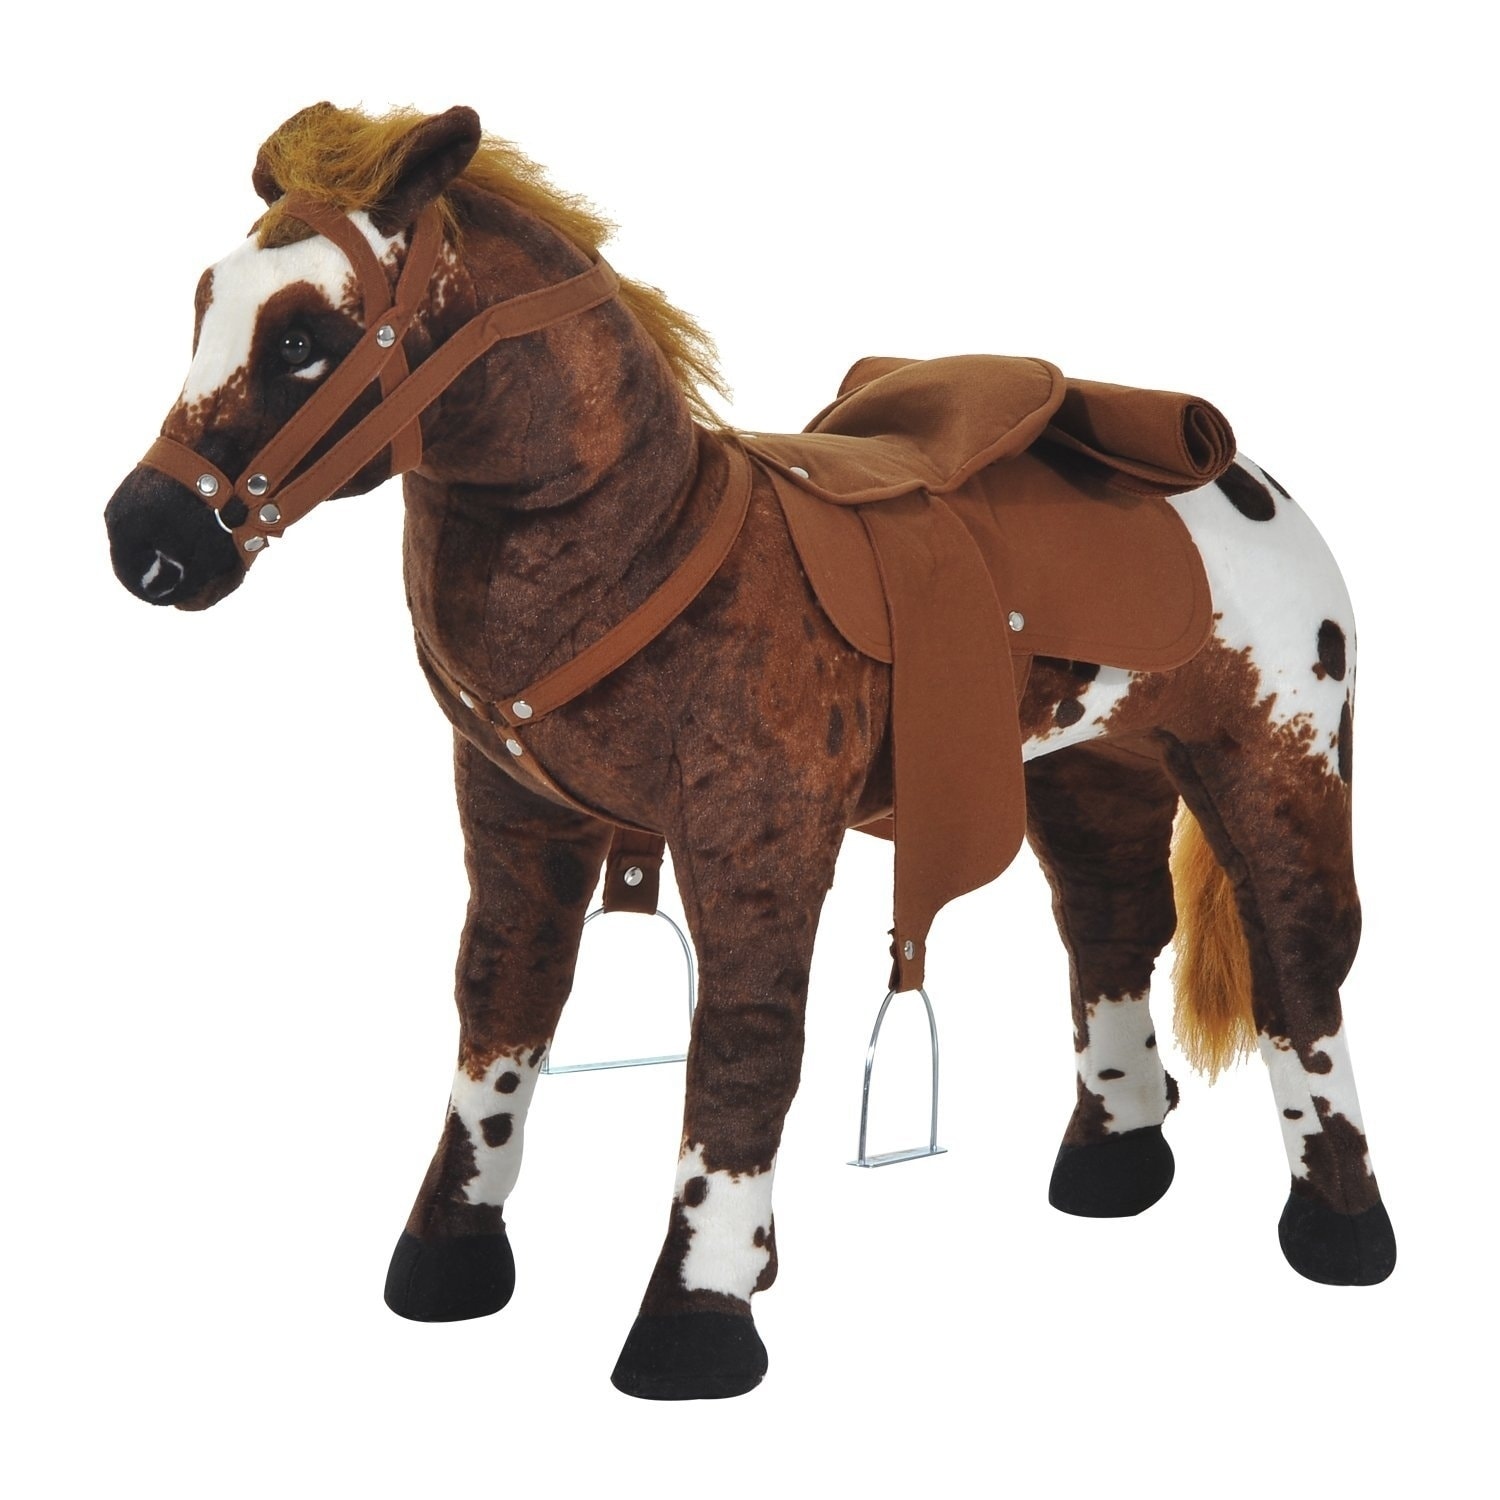 toy horse that moves and neighs